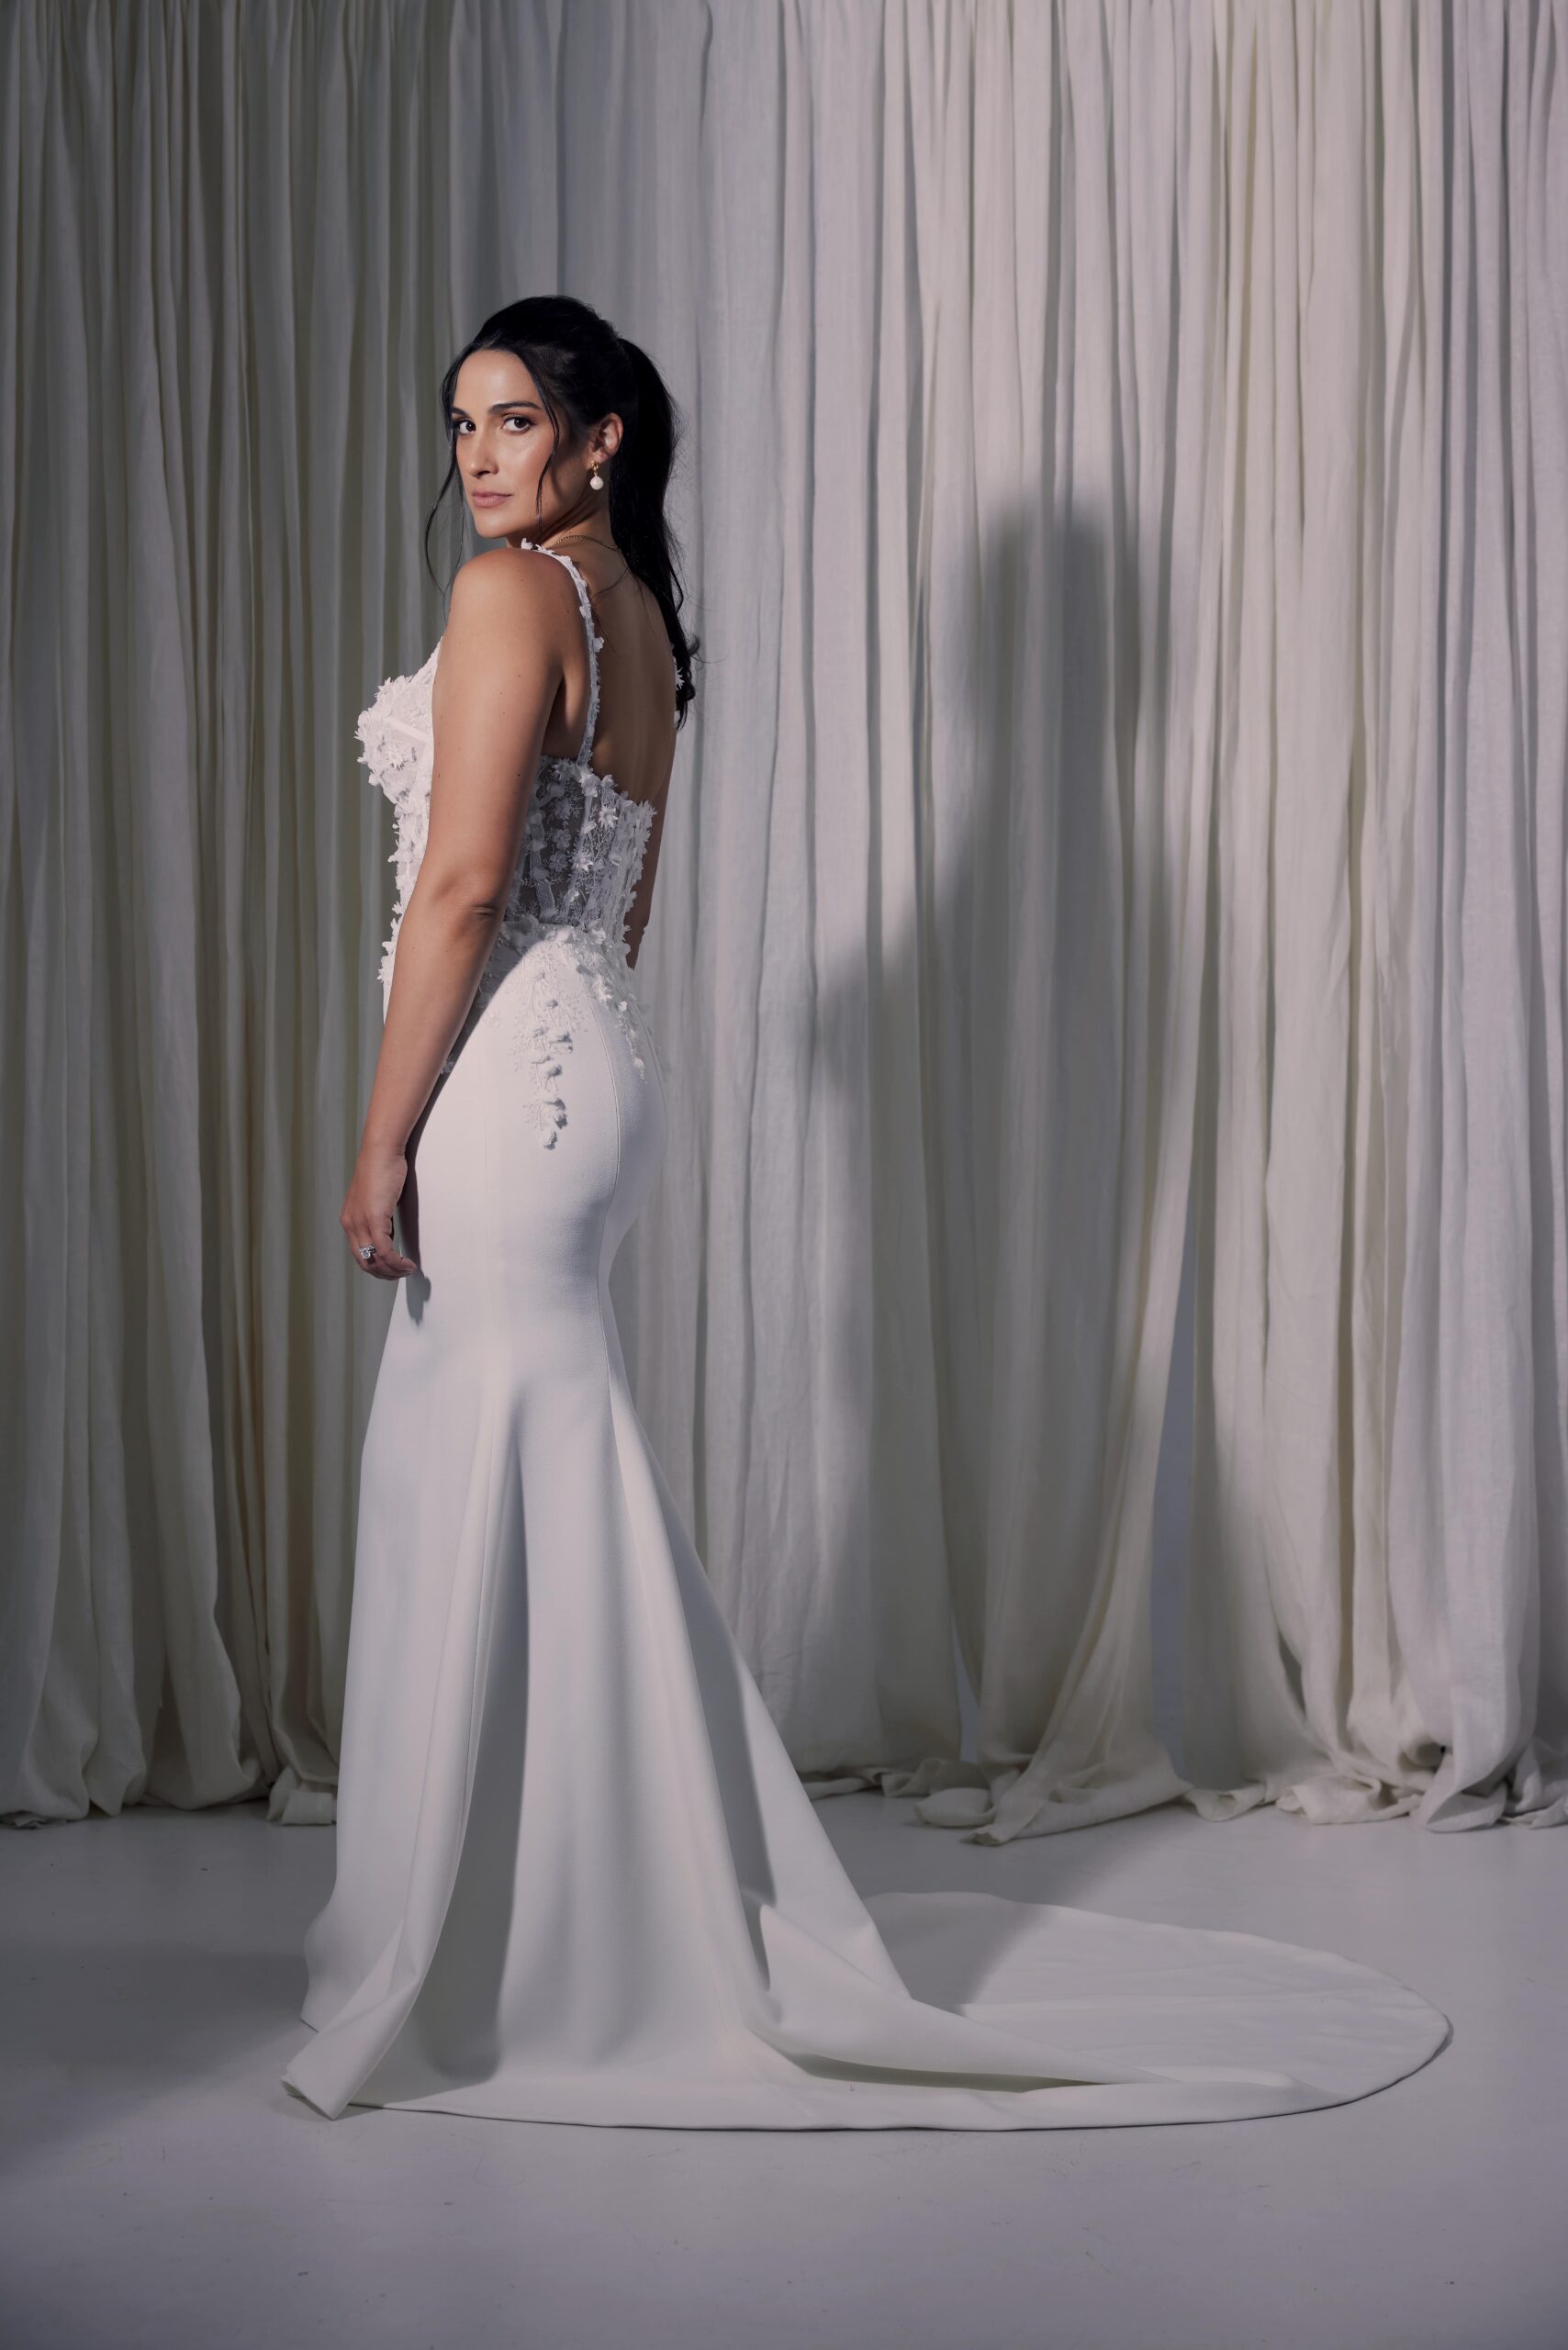 The Celena gown - a fit and flare silhouette with a sculpted sheer bodice with exposed boning and 3D lace.